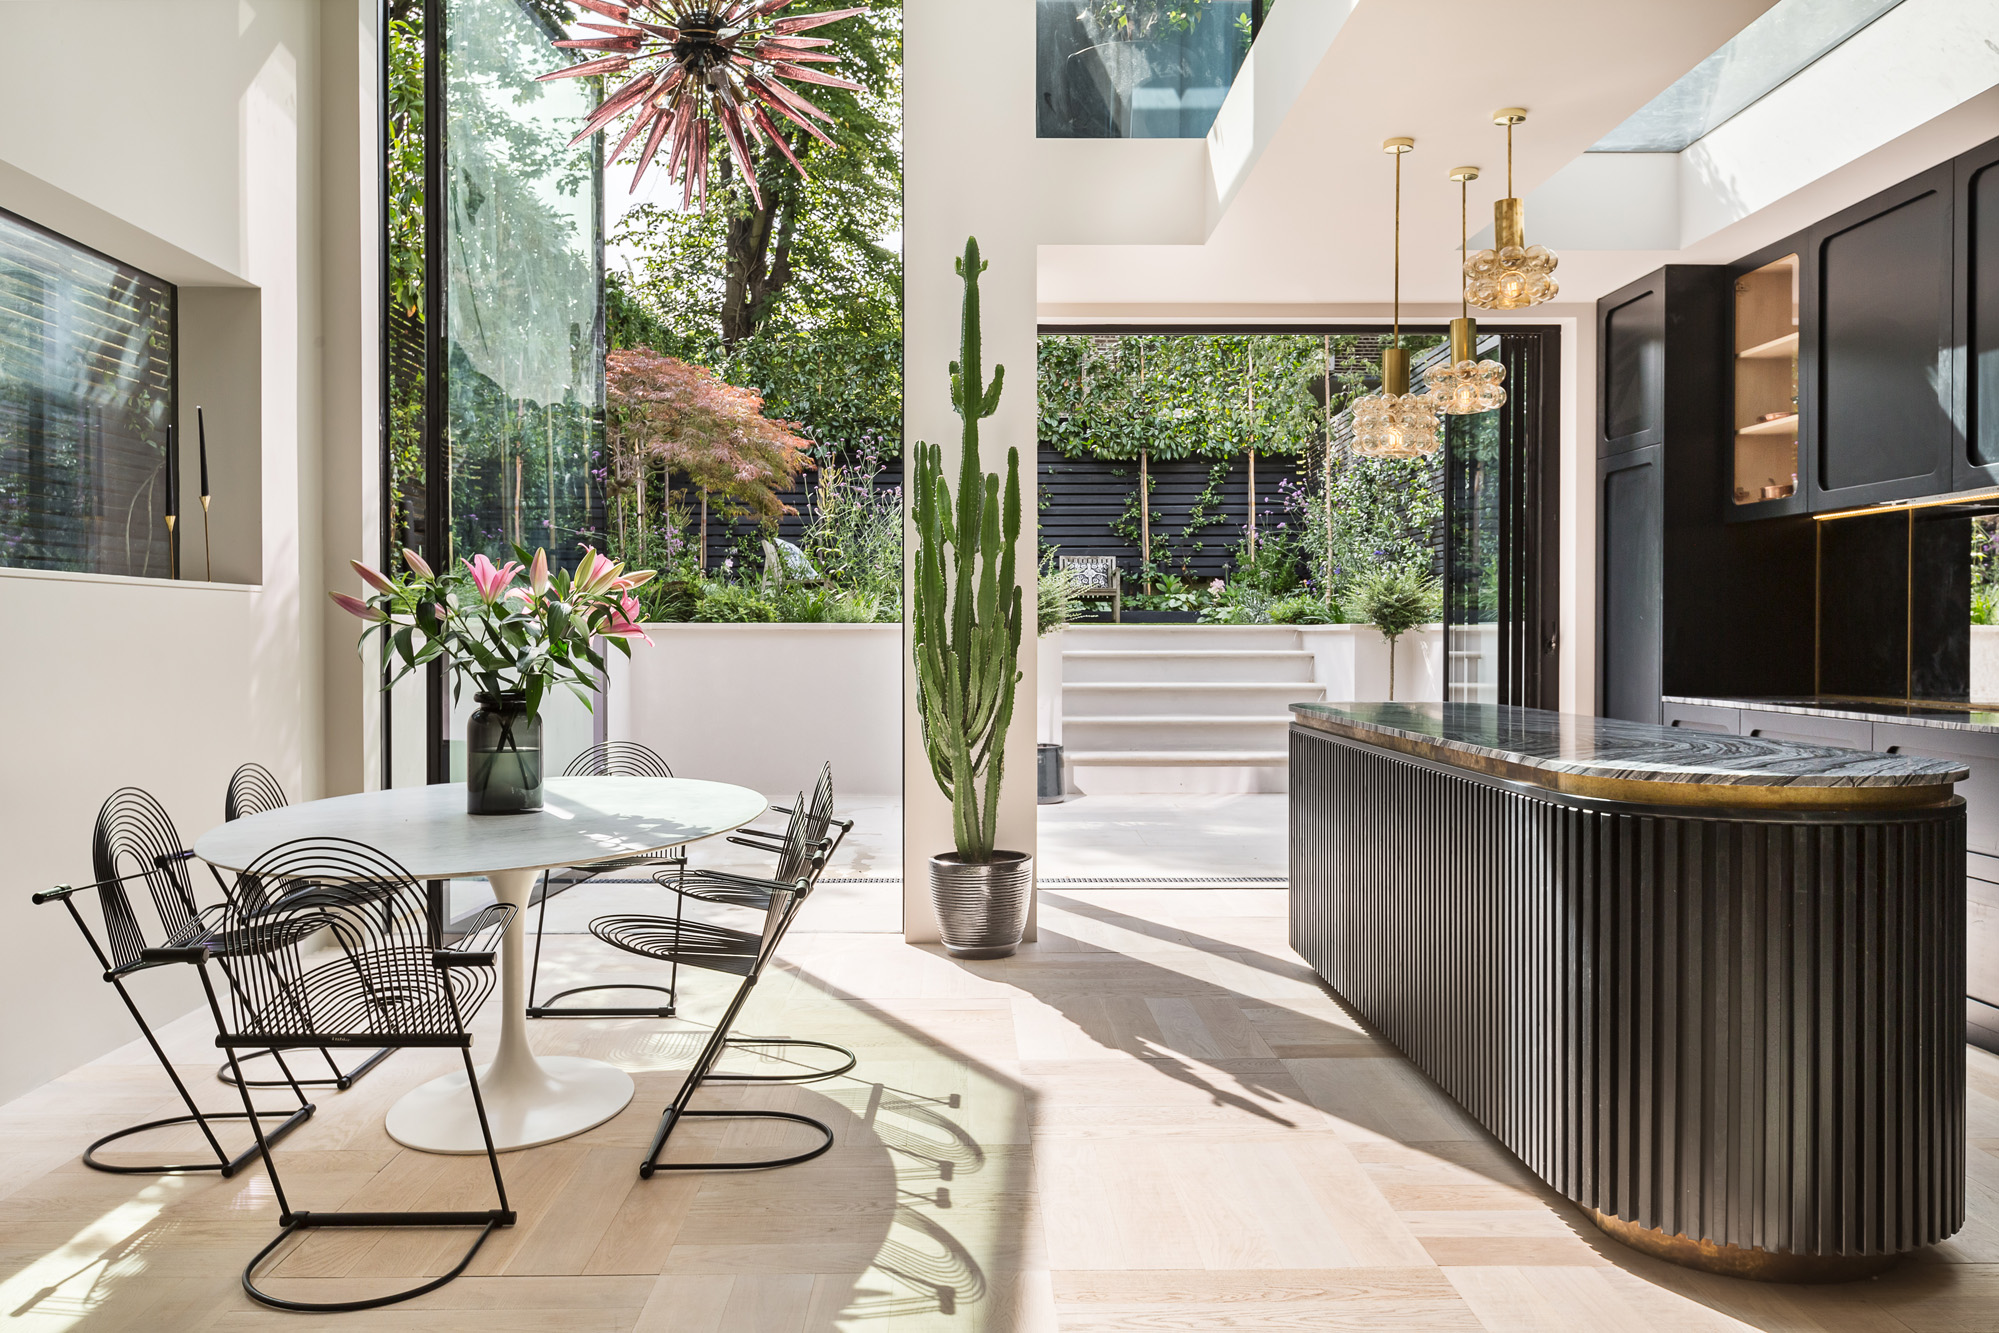 The open-plan kitchen and reception, with a striking sculptural chandelier, in a luxury rental apartment in London